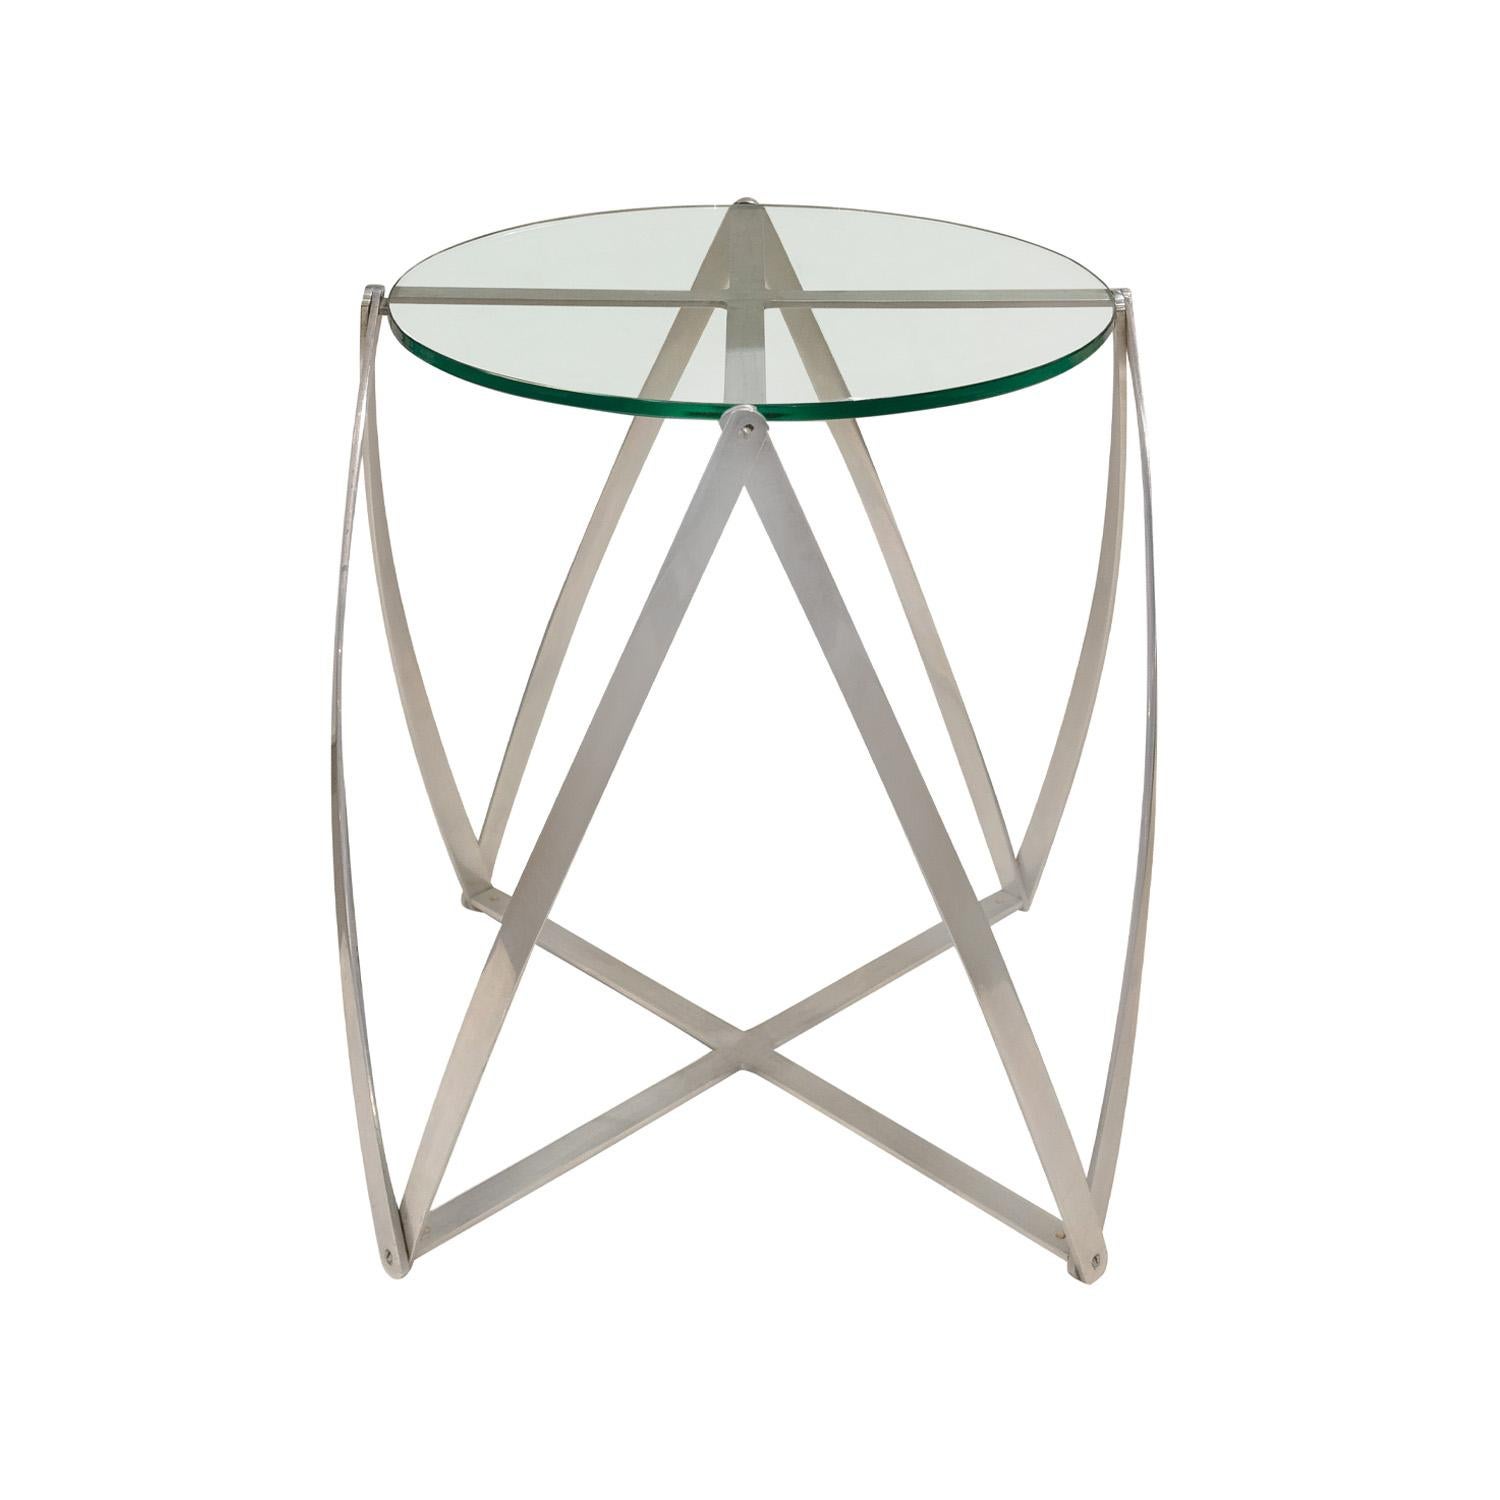 Sculptural end table in brushed aluminum with inset glass top by John Vesey, American 1970's.  As with all Vesey designs, this table is super chic and beautifully made.